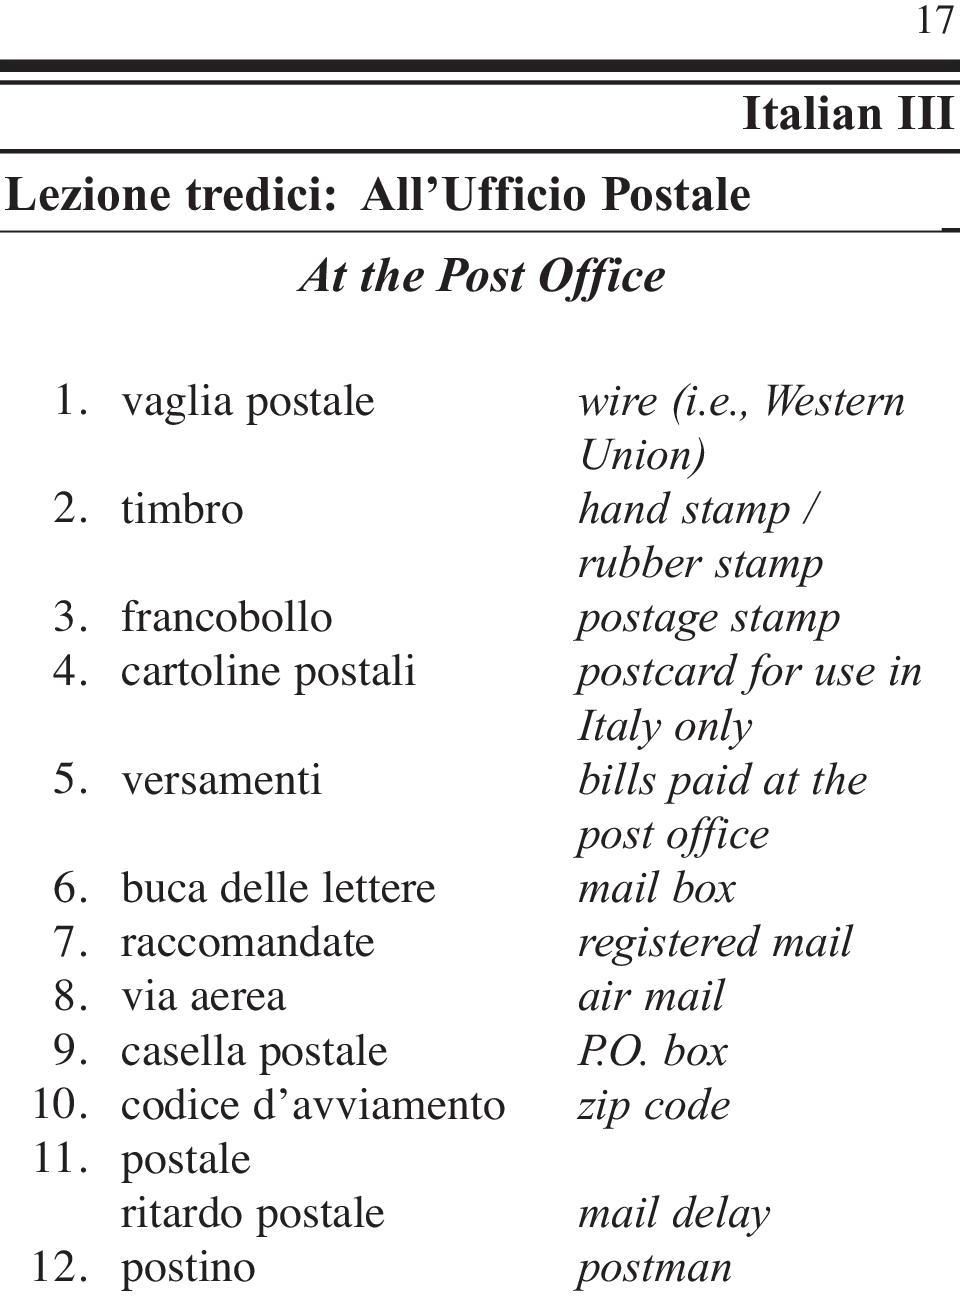 hand stamp / rubber stamp francobollo postage stamp cartoline postali postcard for use in Italy only